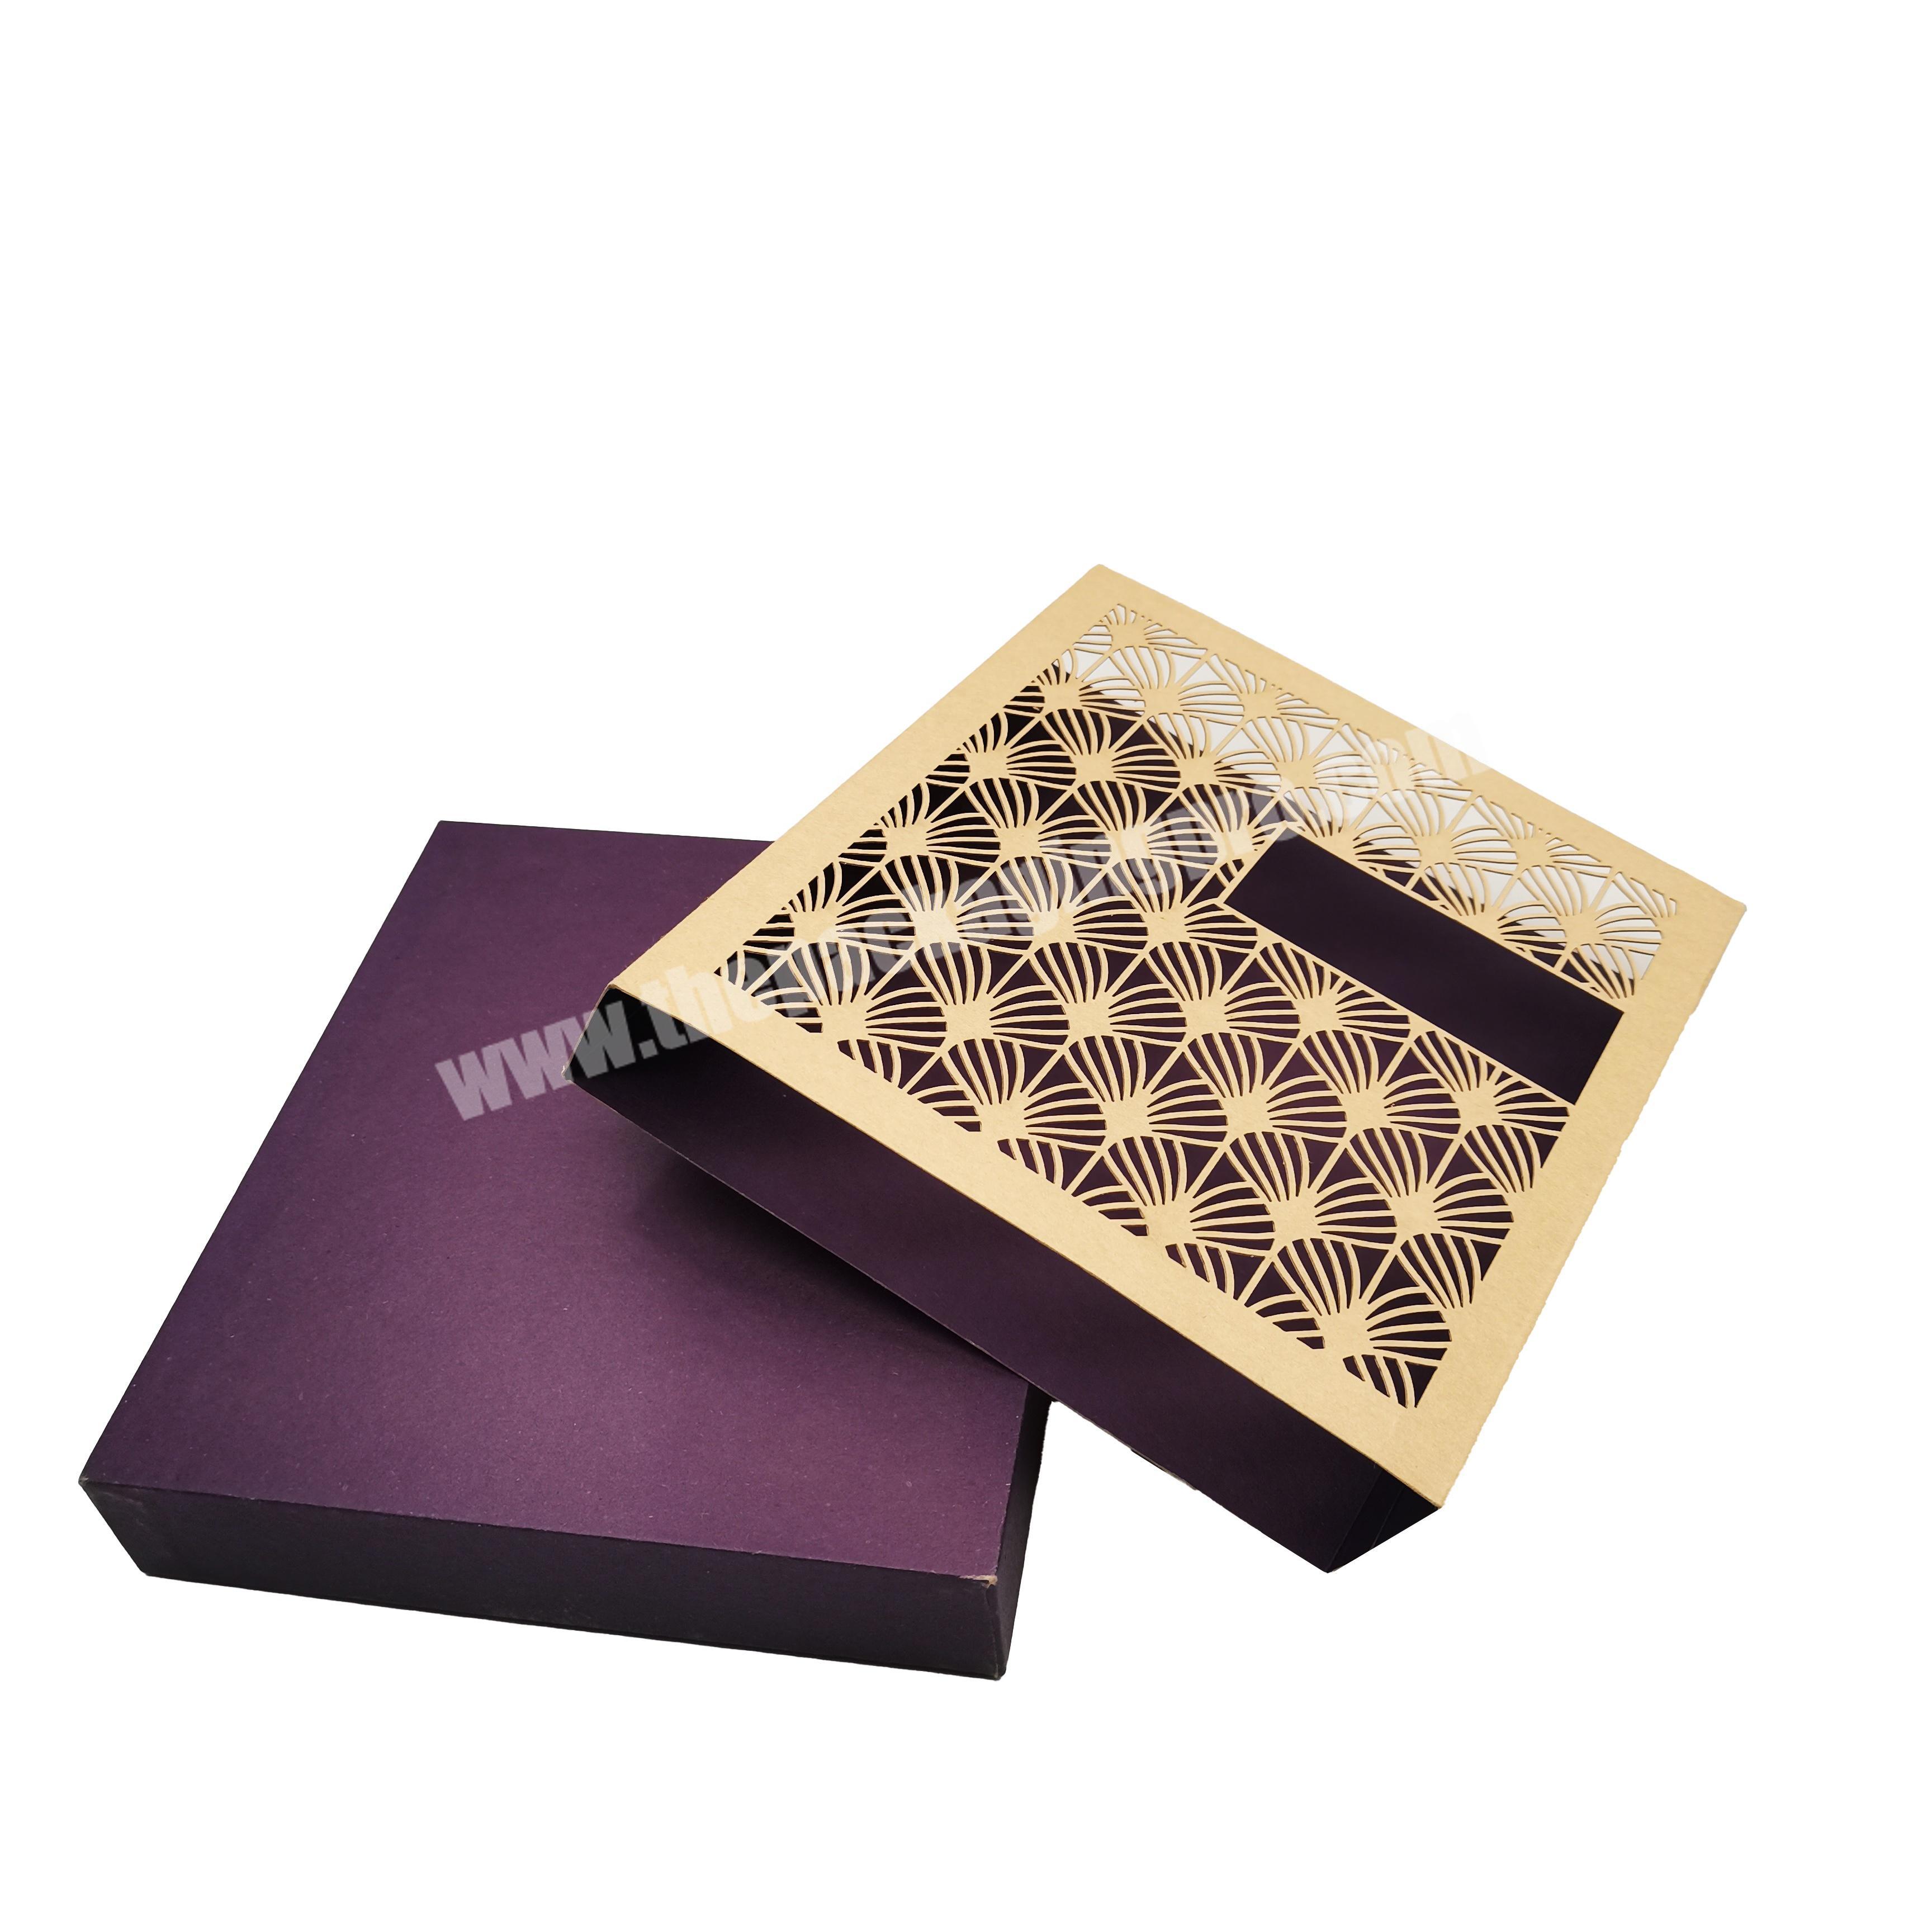 kexin custom logo purple two pieces lid and base essential oil gift packaging boxes with dividers and paper cut